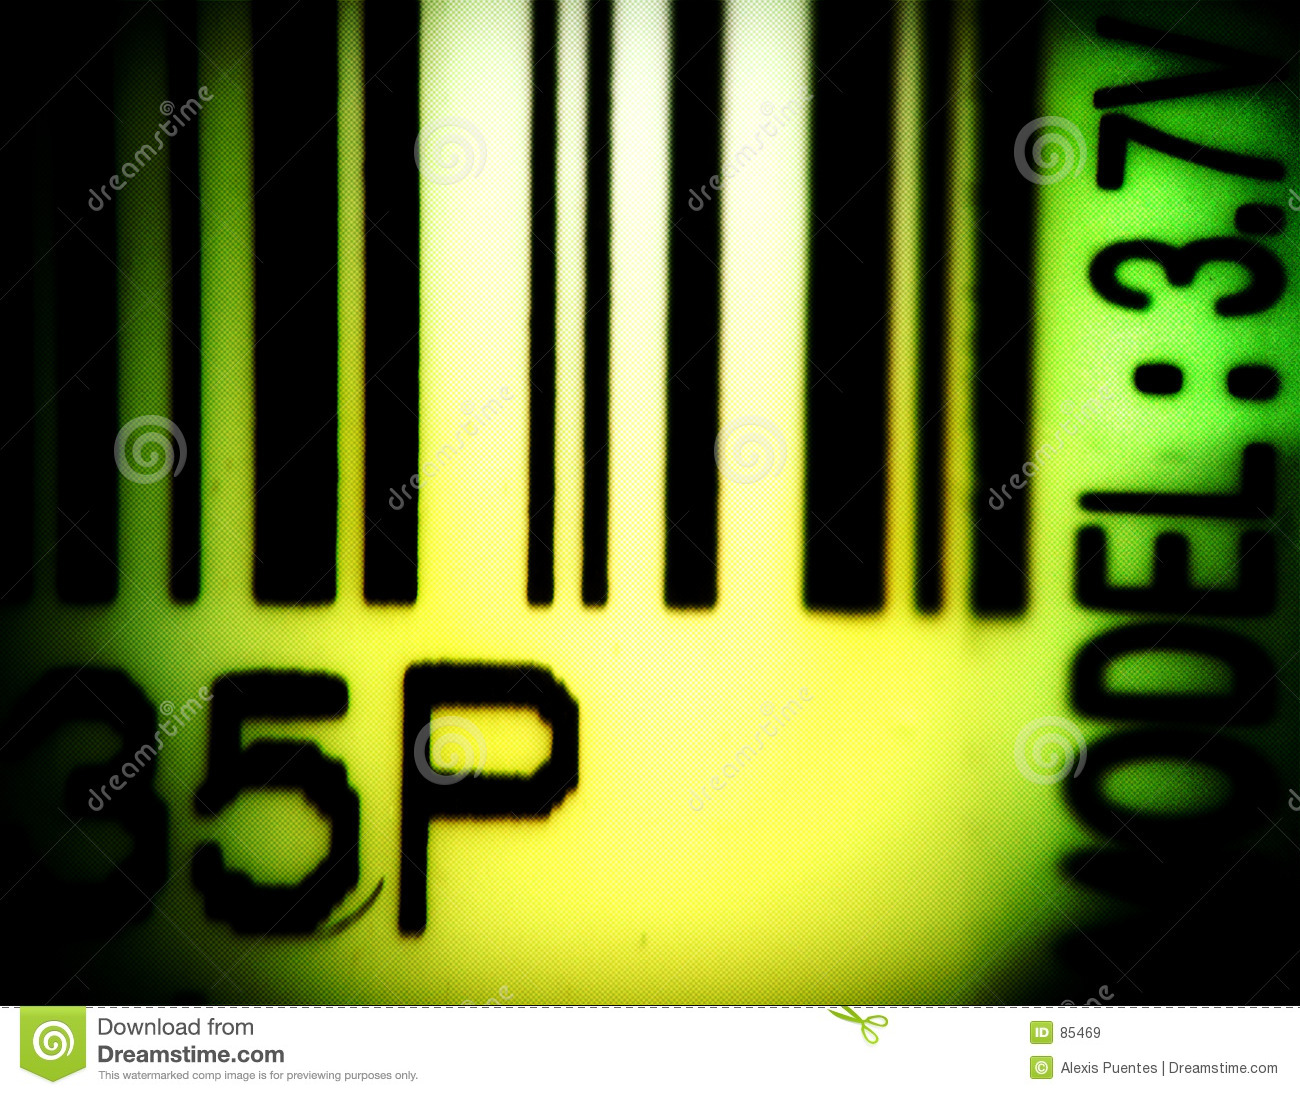 Computer Illustration Of A Barcode Strip And Random Numbers